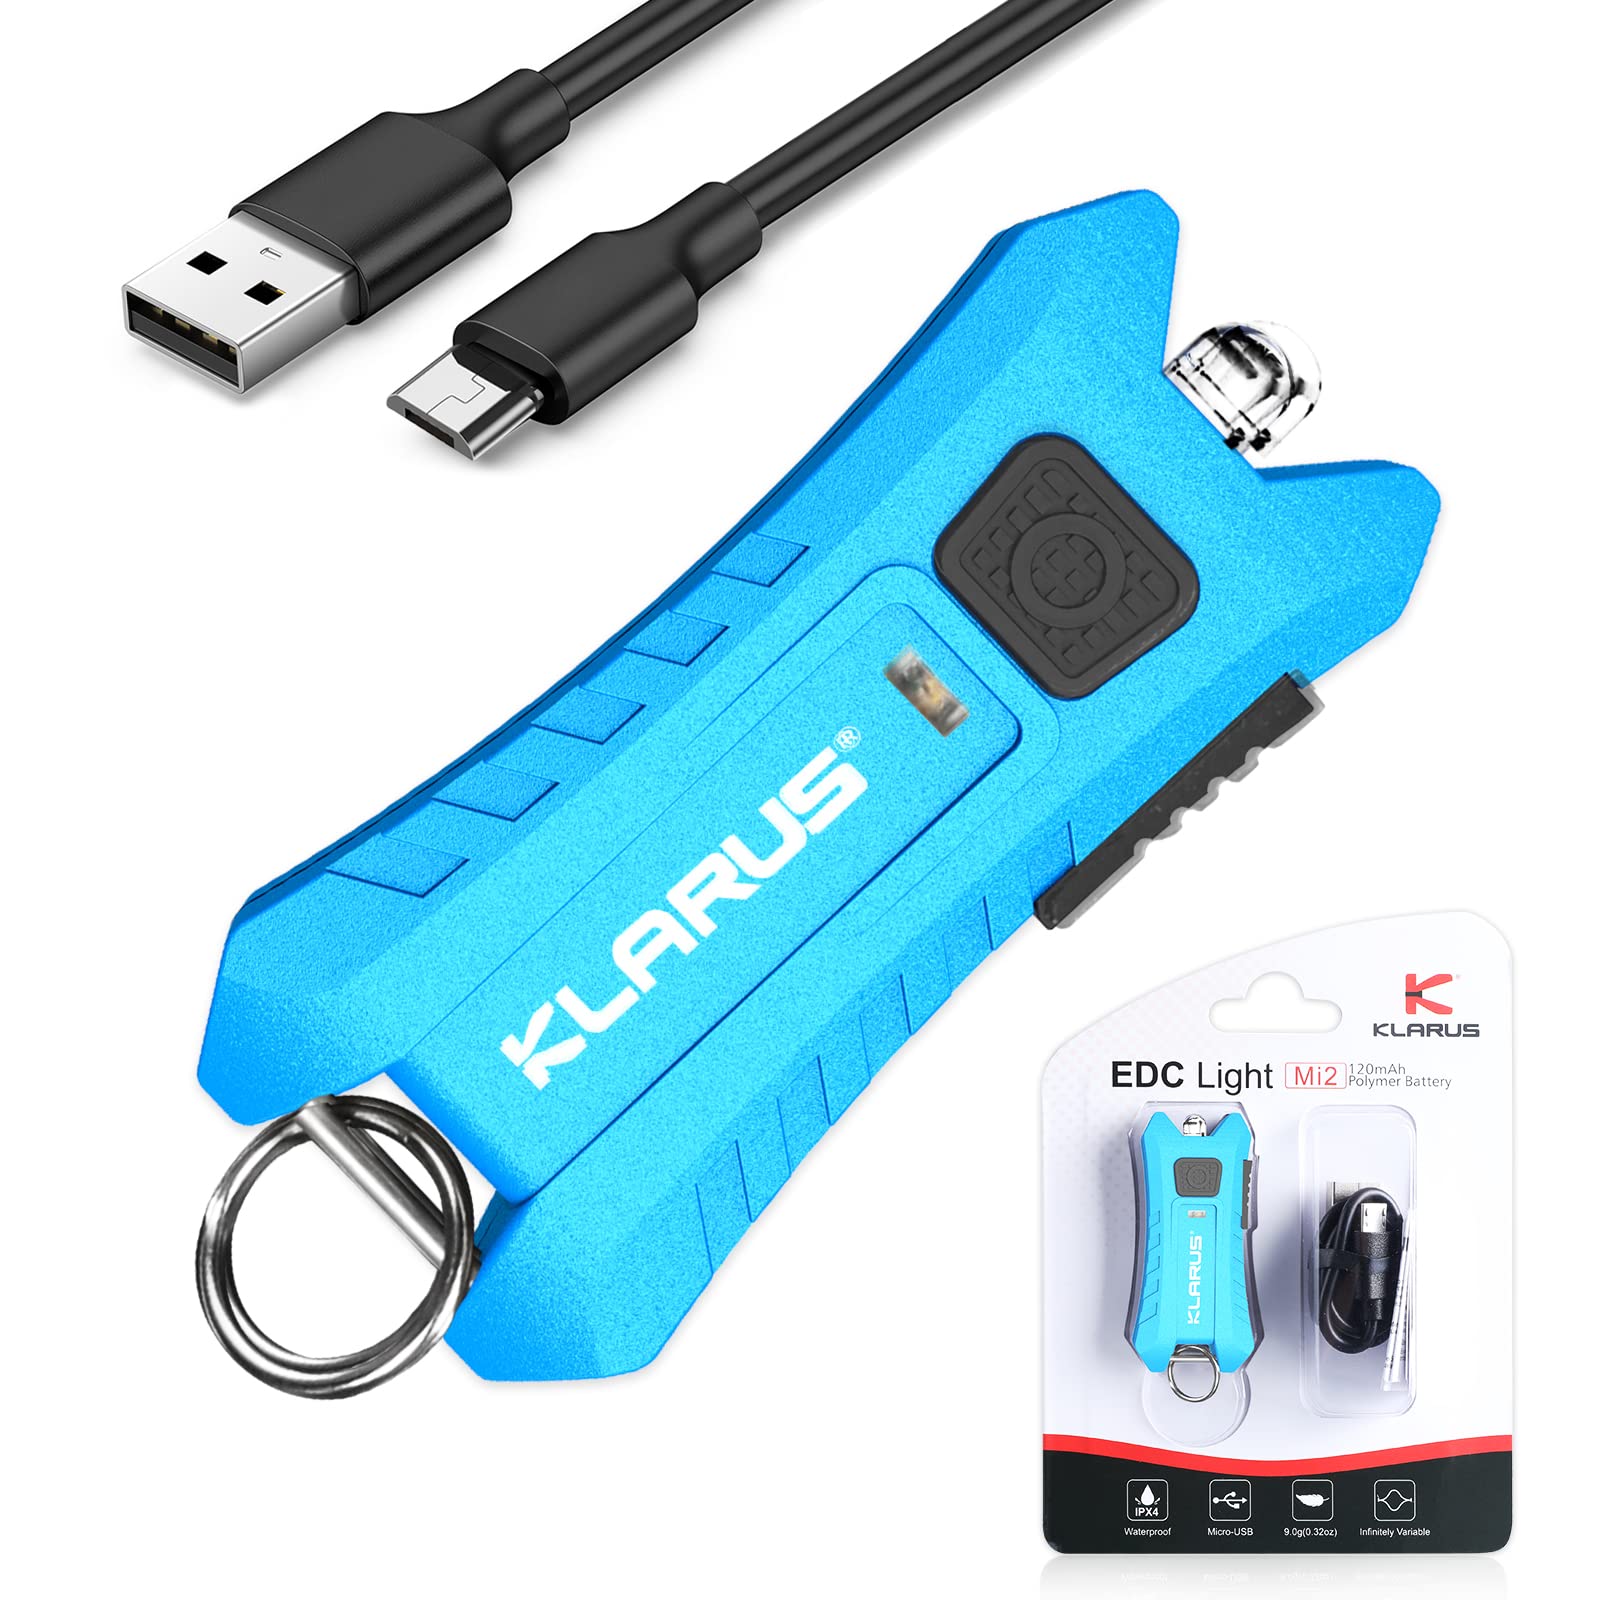 Klarus Mi2 Rechargeable LED Keyring Torch, 40 Lumens Small Lightweight Pocket Keychain Flashlight Powered by Bulid-in Battery